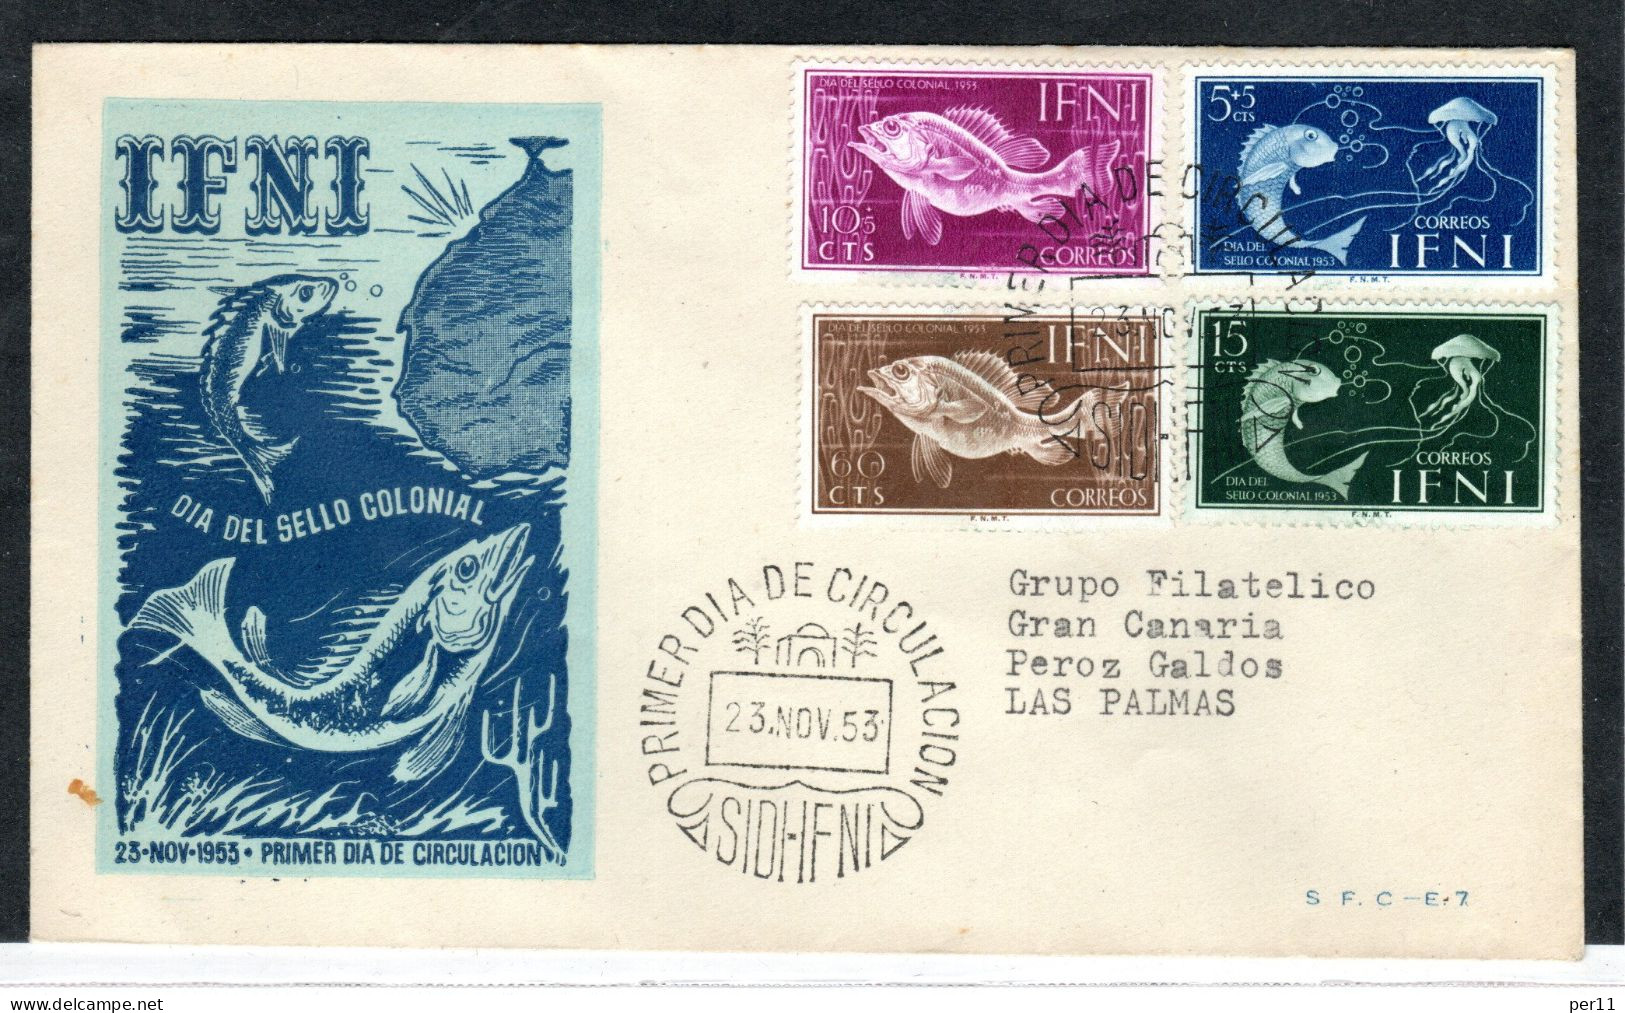 1953 Nice Letter With Fish  (es014) - Ifni